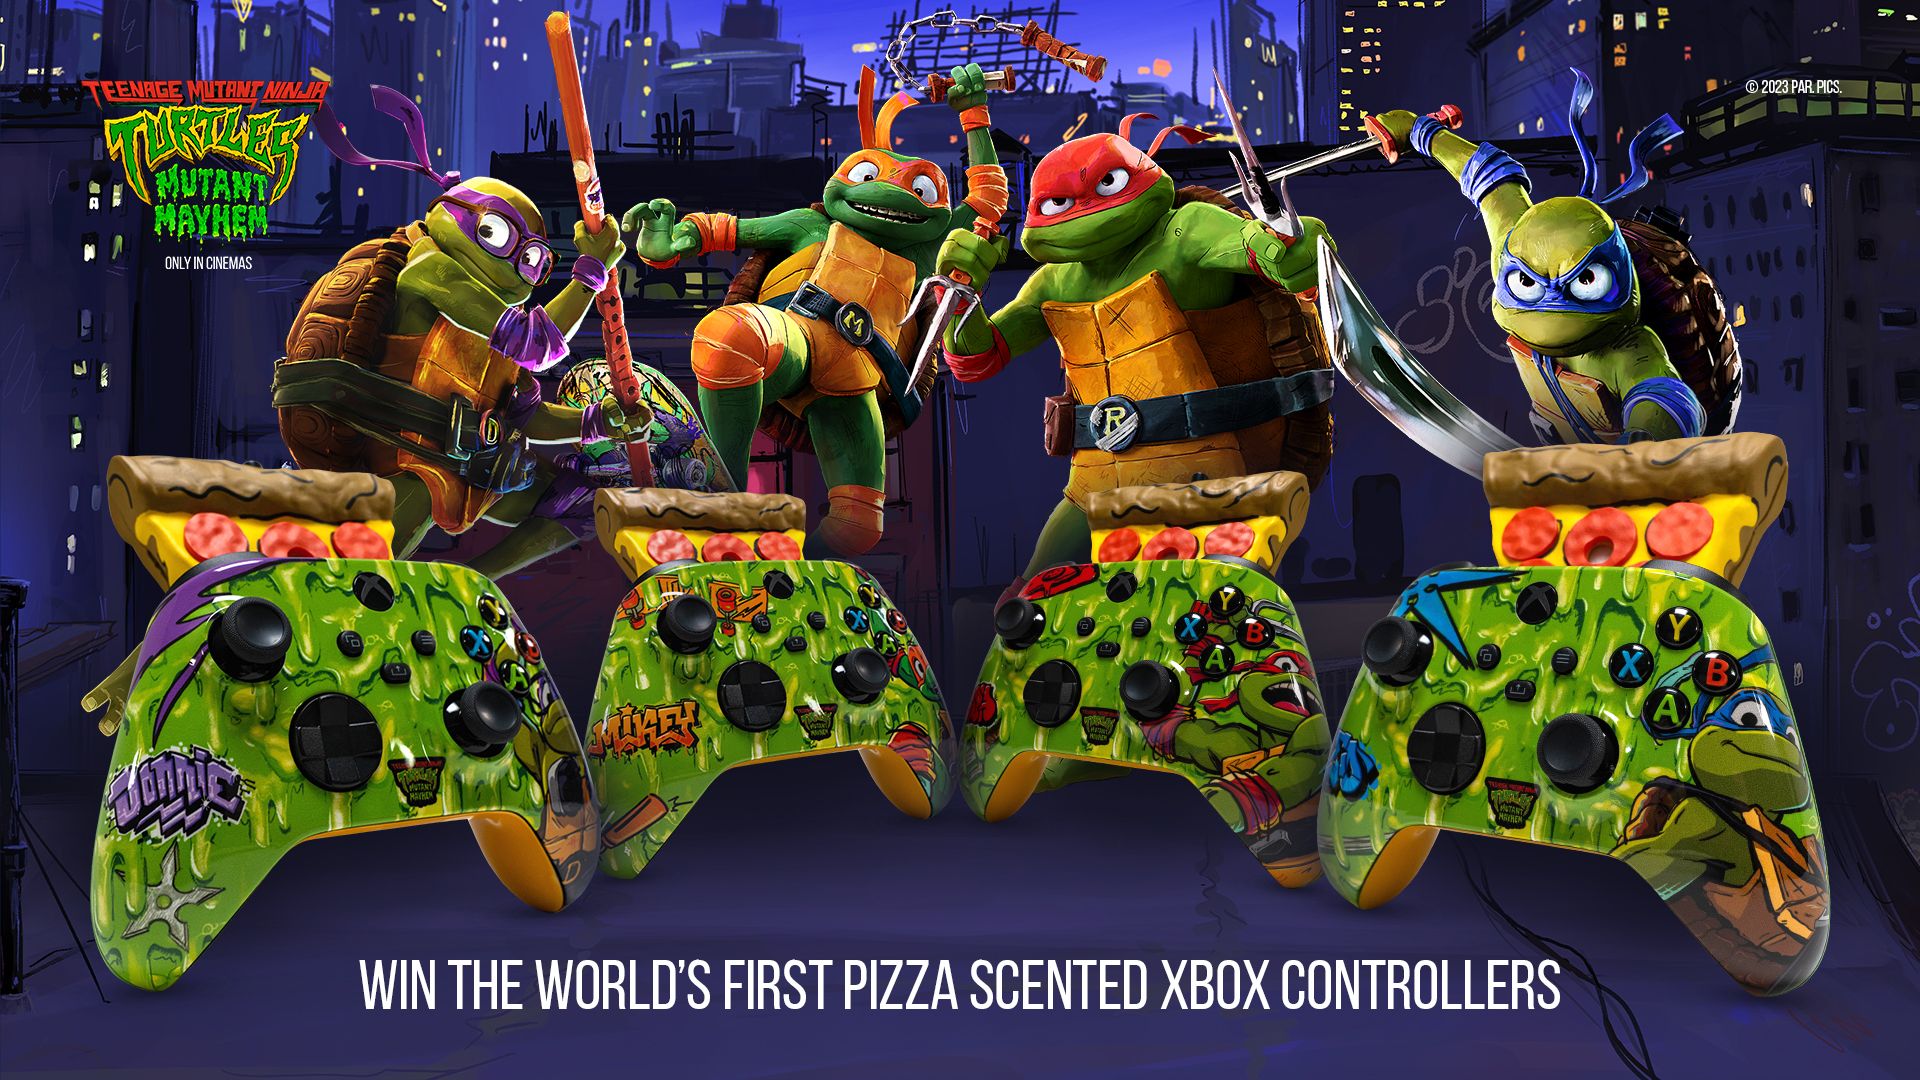 Ninja Turtles will love it: Microsoft has unveiled an unusual pizza-scented Xbox